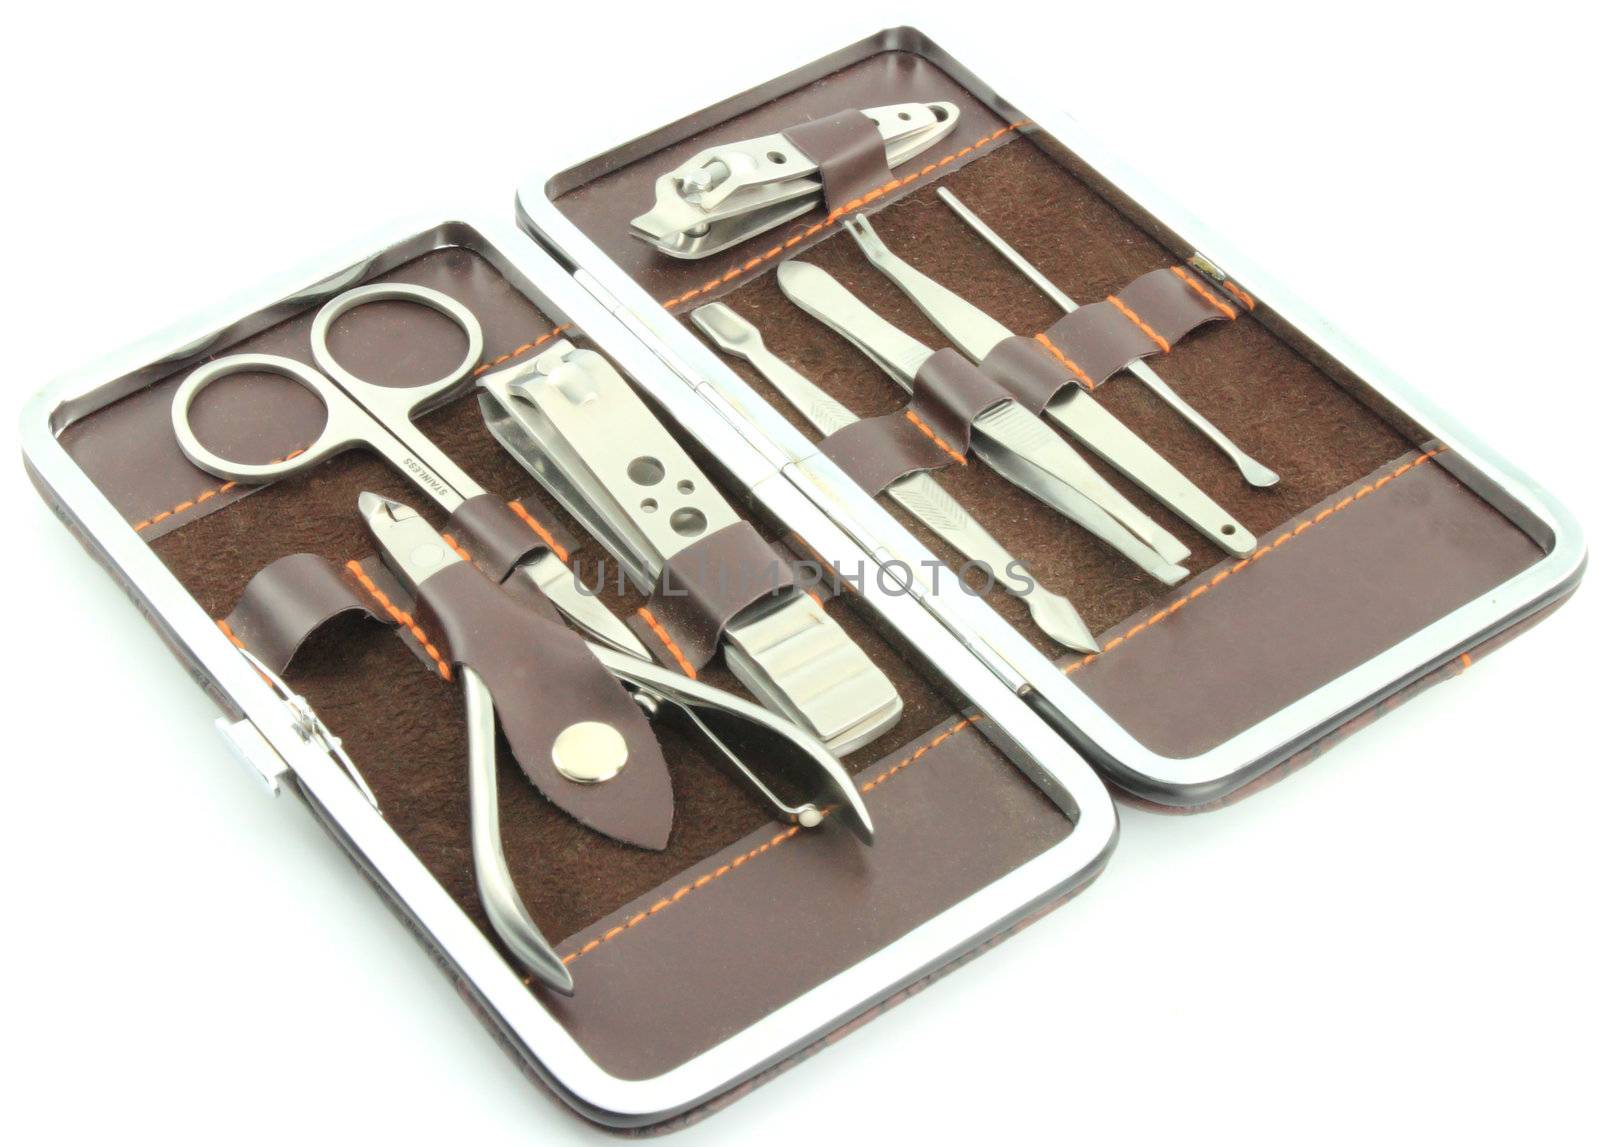 Tools of a manicure set by geargodz